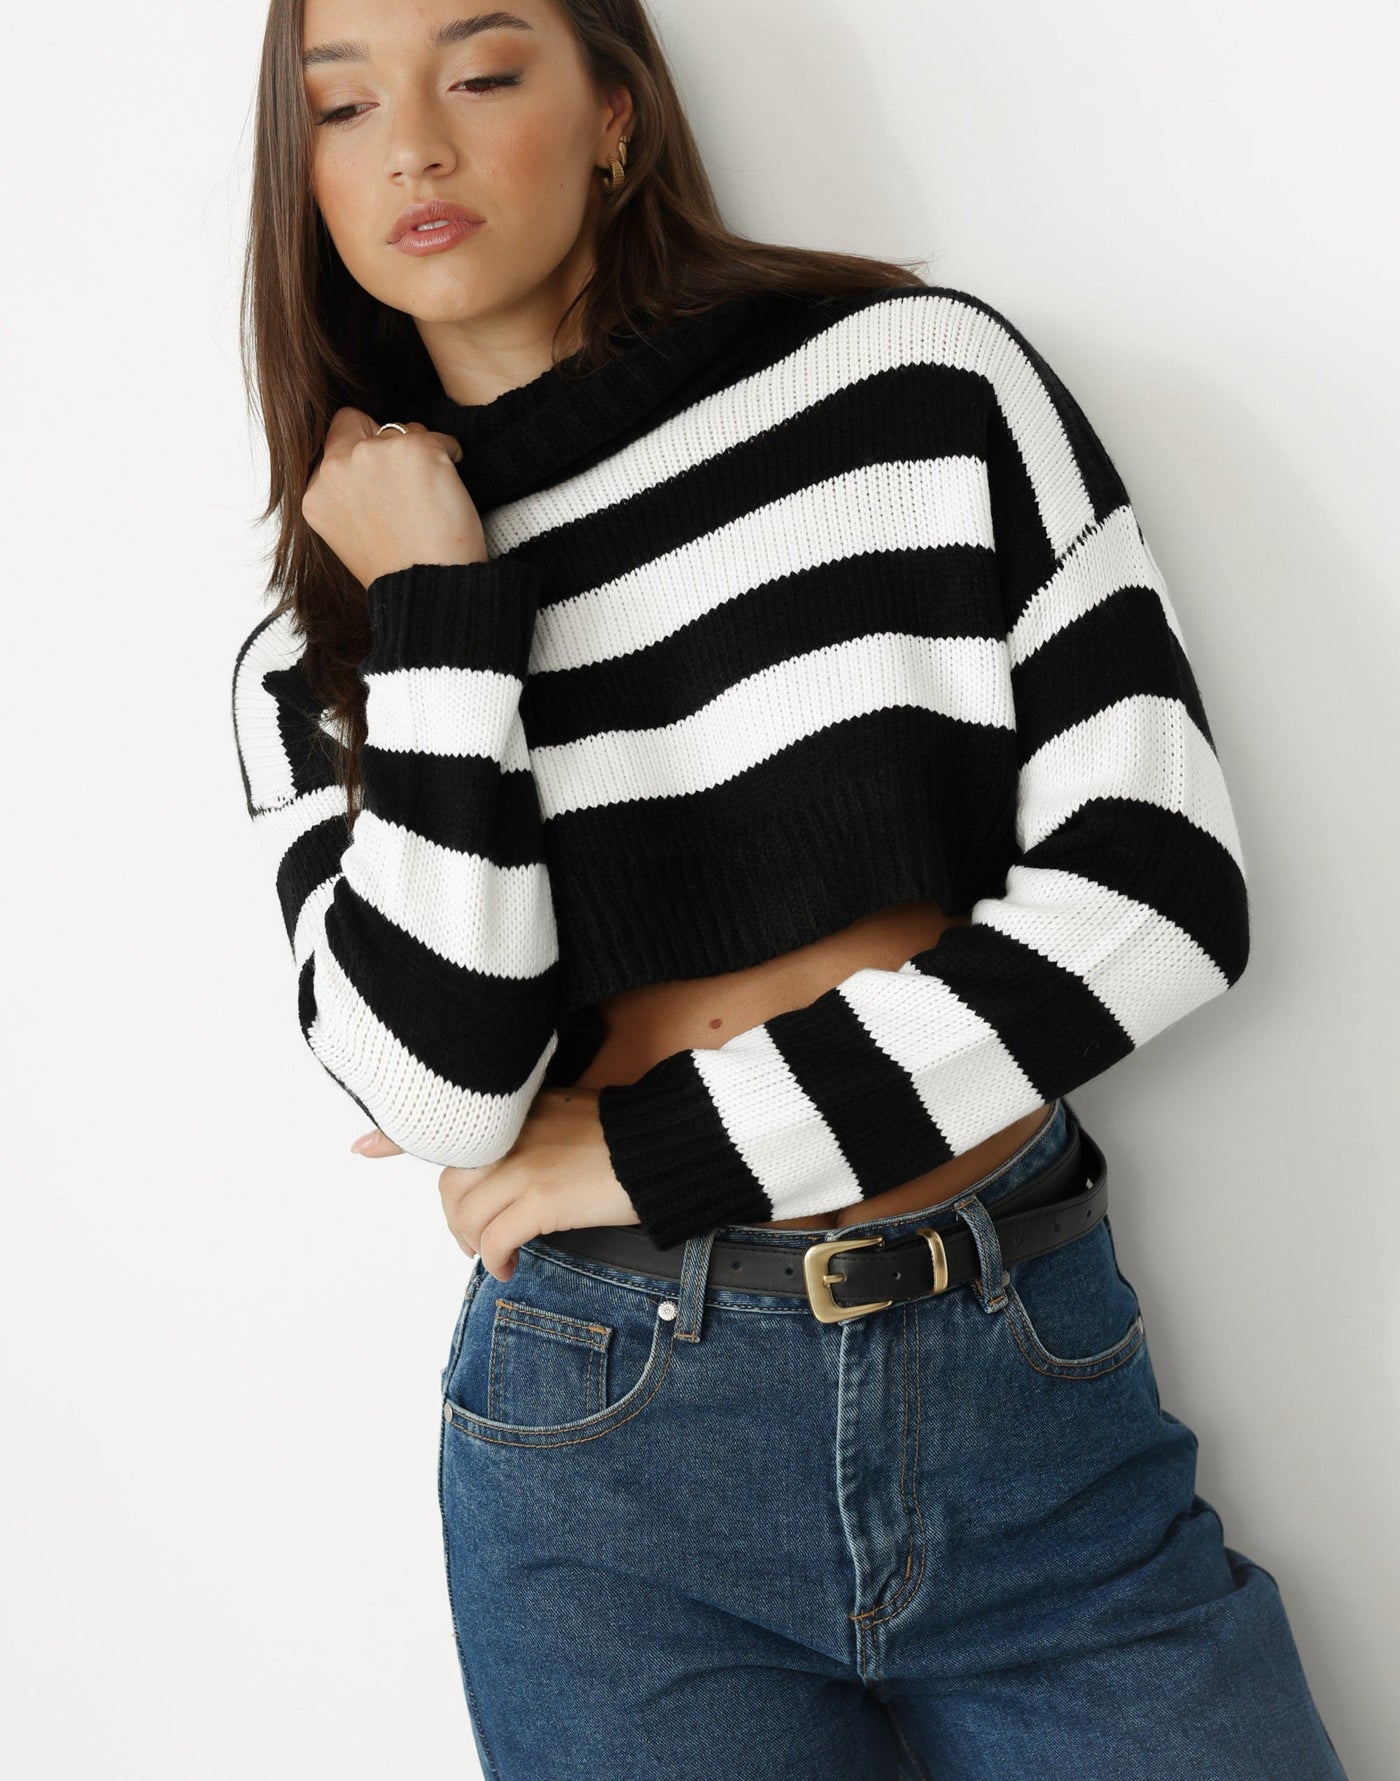 Laurent Jumper (Black/White) - Turtle Neck Striped Cropped Ribbed Jumper - Women's Top - Charcoal Clothing